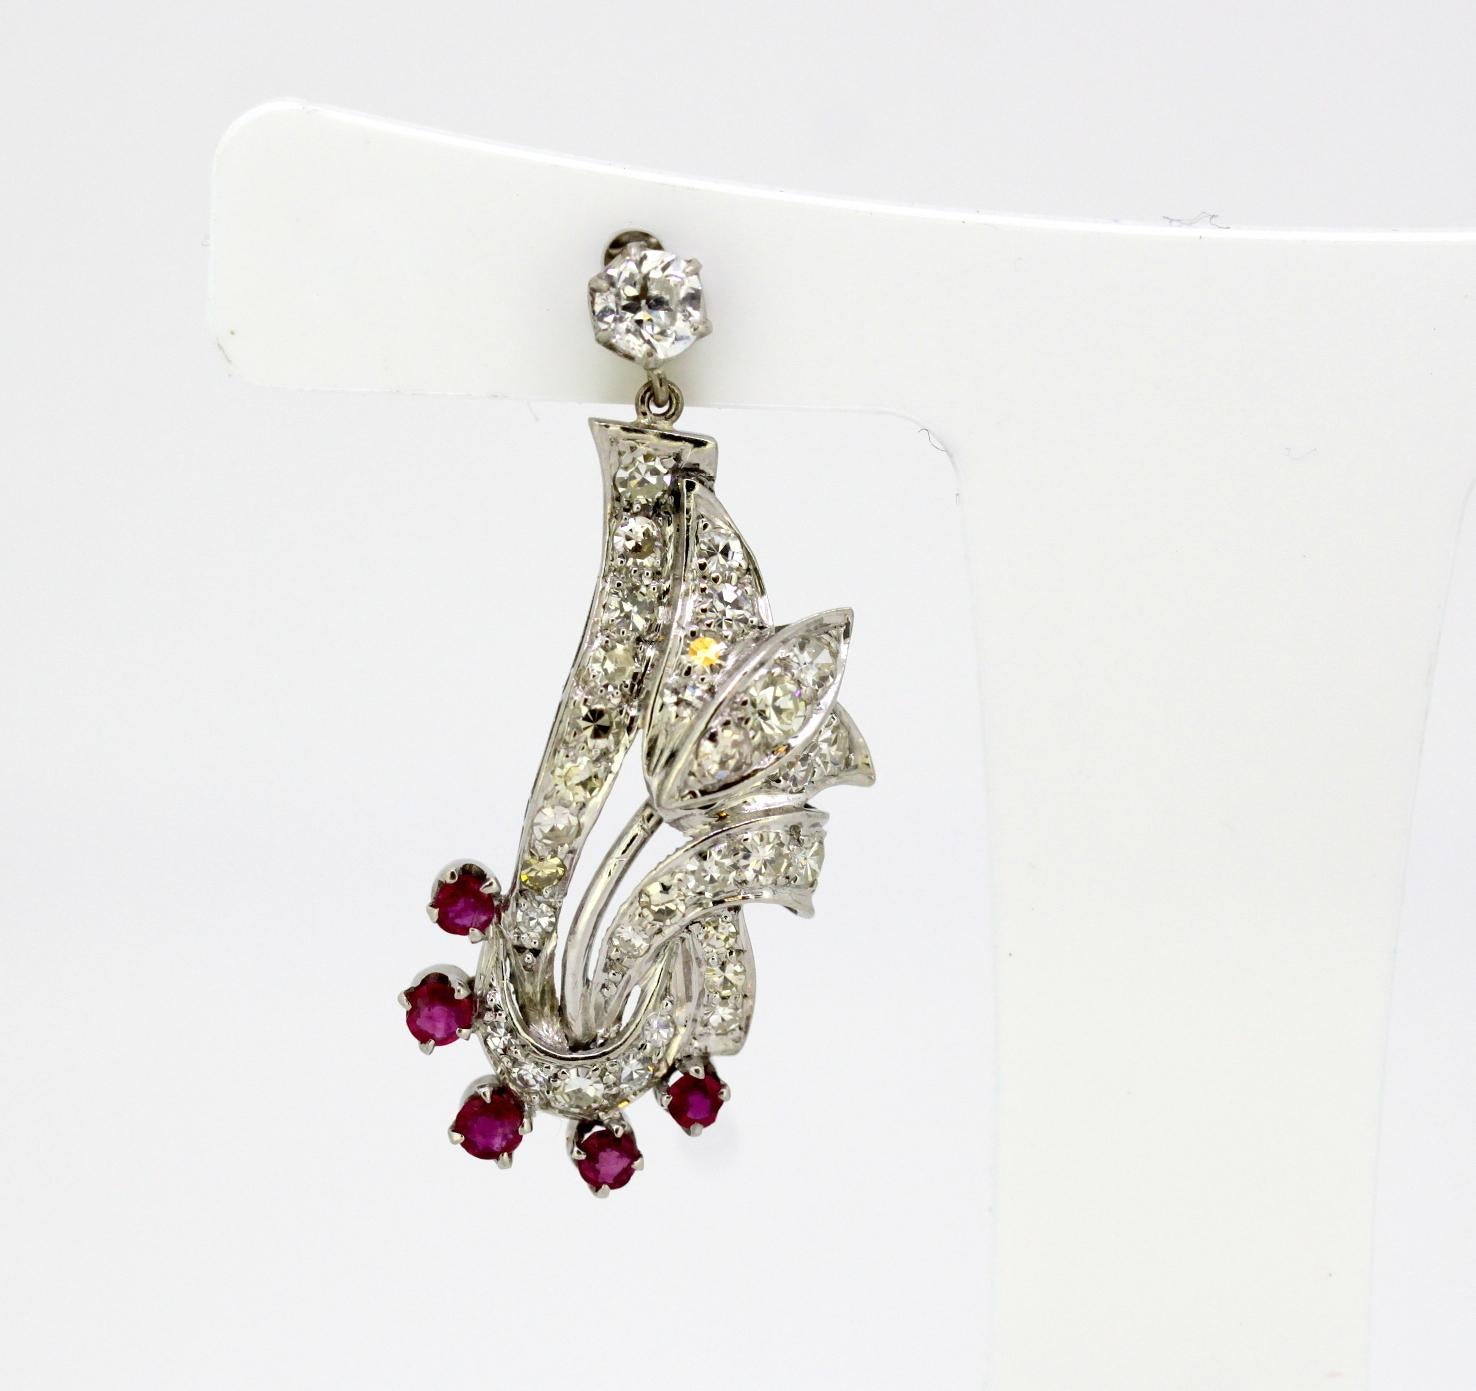 Vintage 18k white gold ladies stud earrings with diamonds and rubies
Made in France Circa 1950's
Hallmarked with eagles head, French standard for 18k gold.

Approx Dimensions - 
Size : 3.5 x 1.8 x 1.6 cm
Weight : 9 grams

Diamonds - 
Cut :